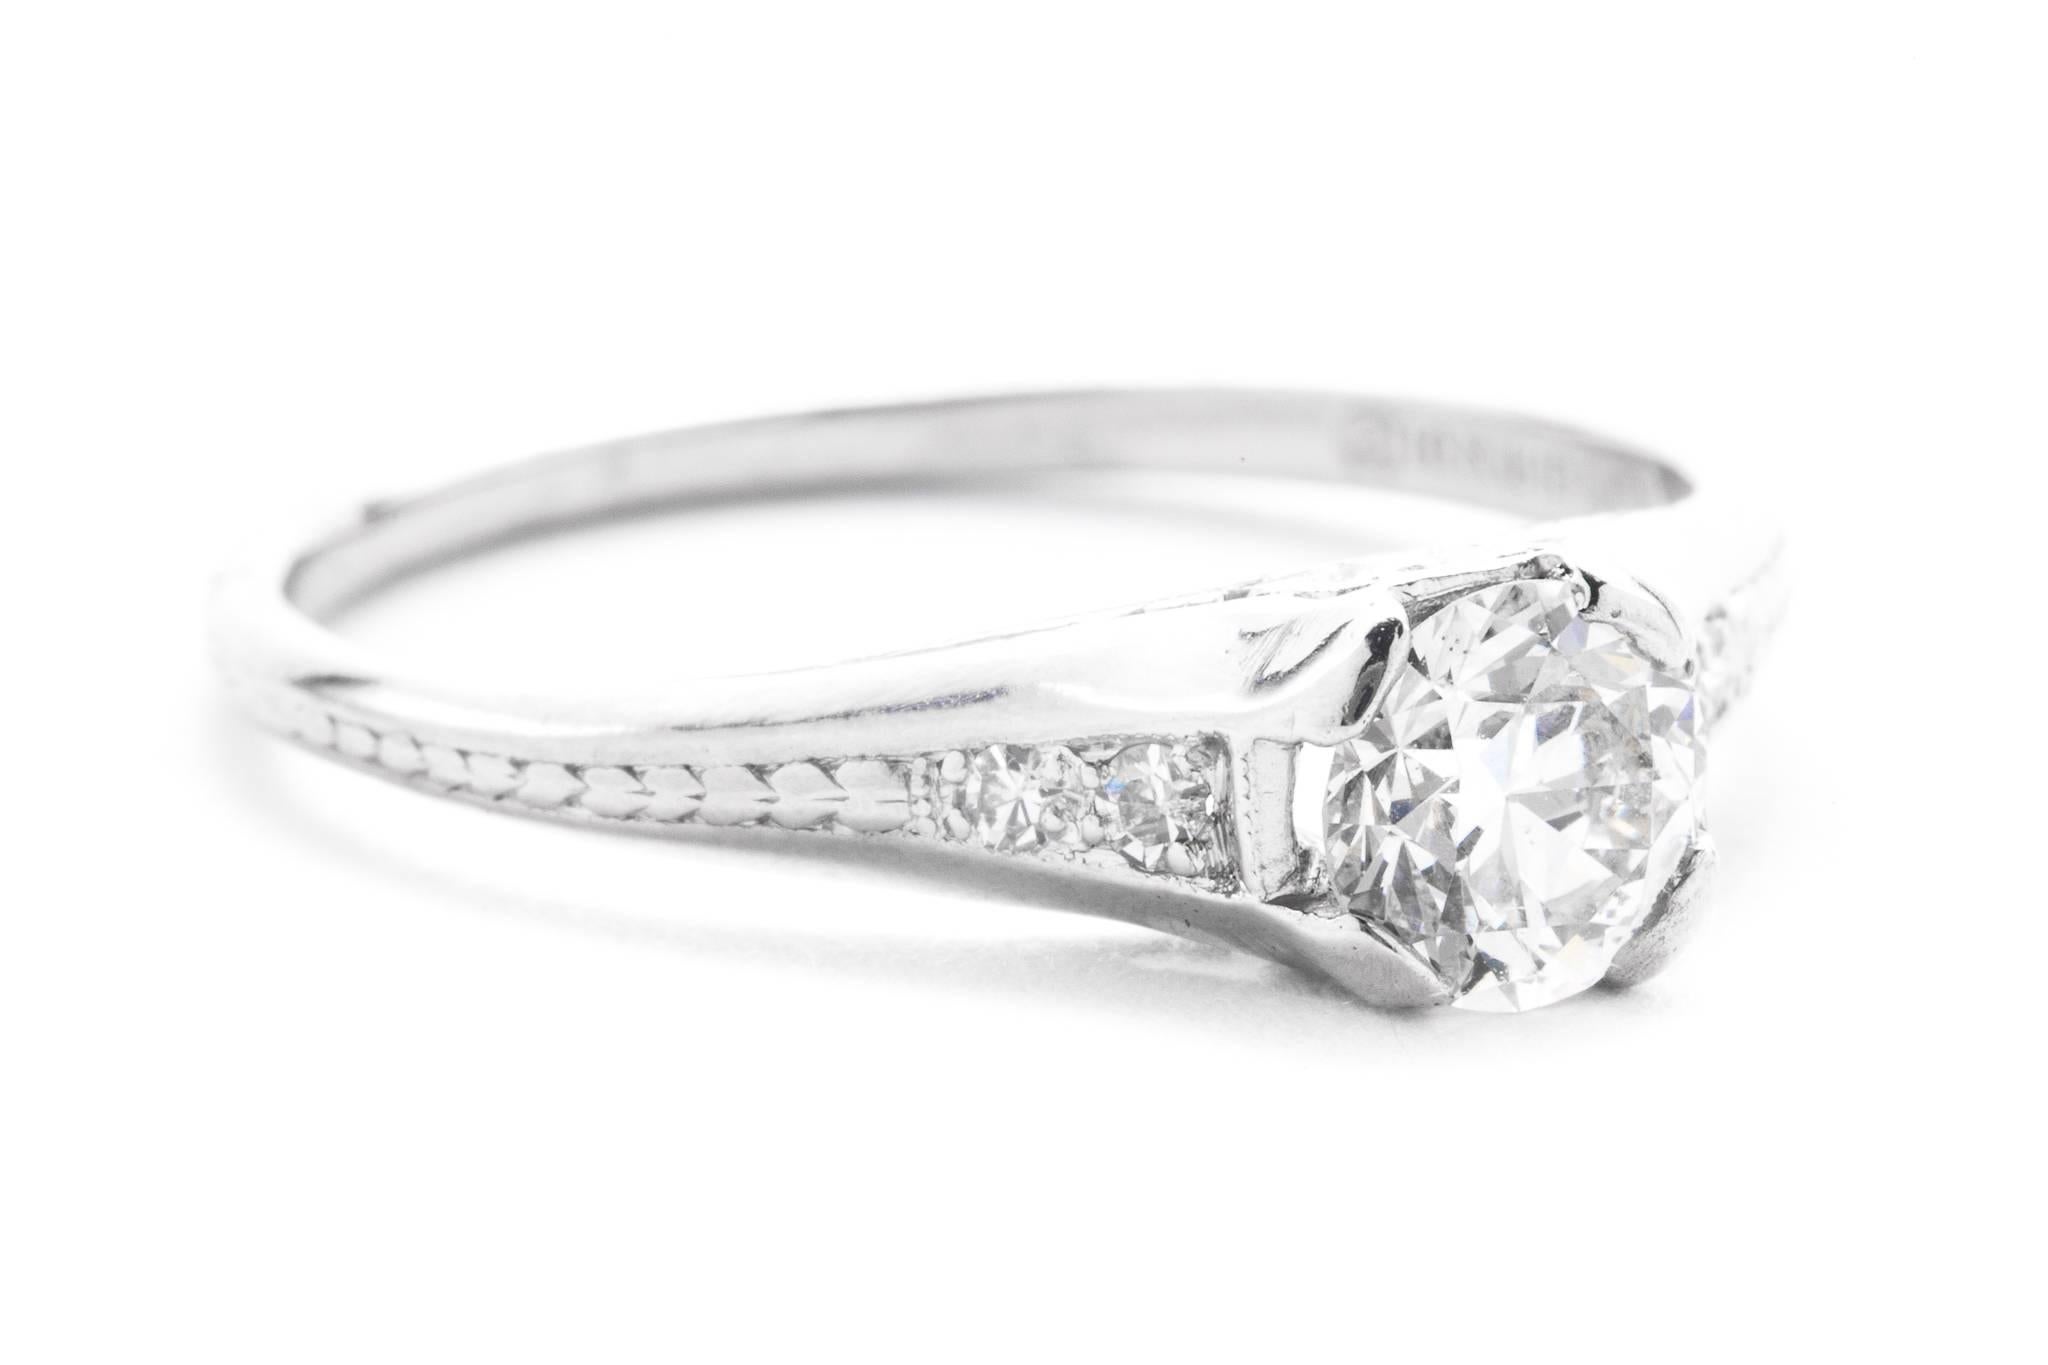 An original art deco period diamond engagement ring in luxurious platinum.  Centered by a 0.70 carat antique European cut diamond this ring features beautiful hand engraving in a traditional art deco manner along with accenting pave set